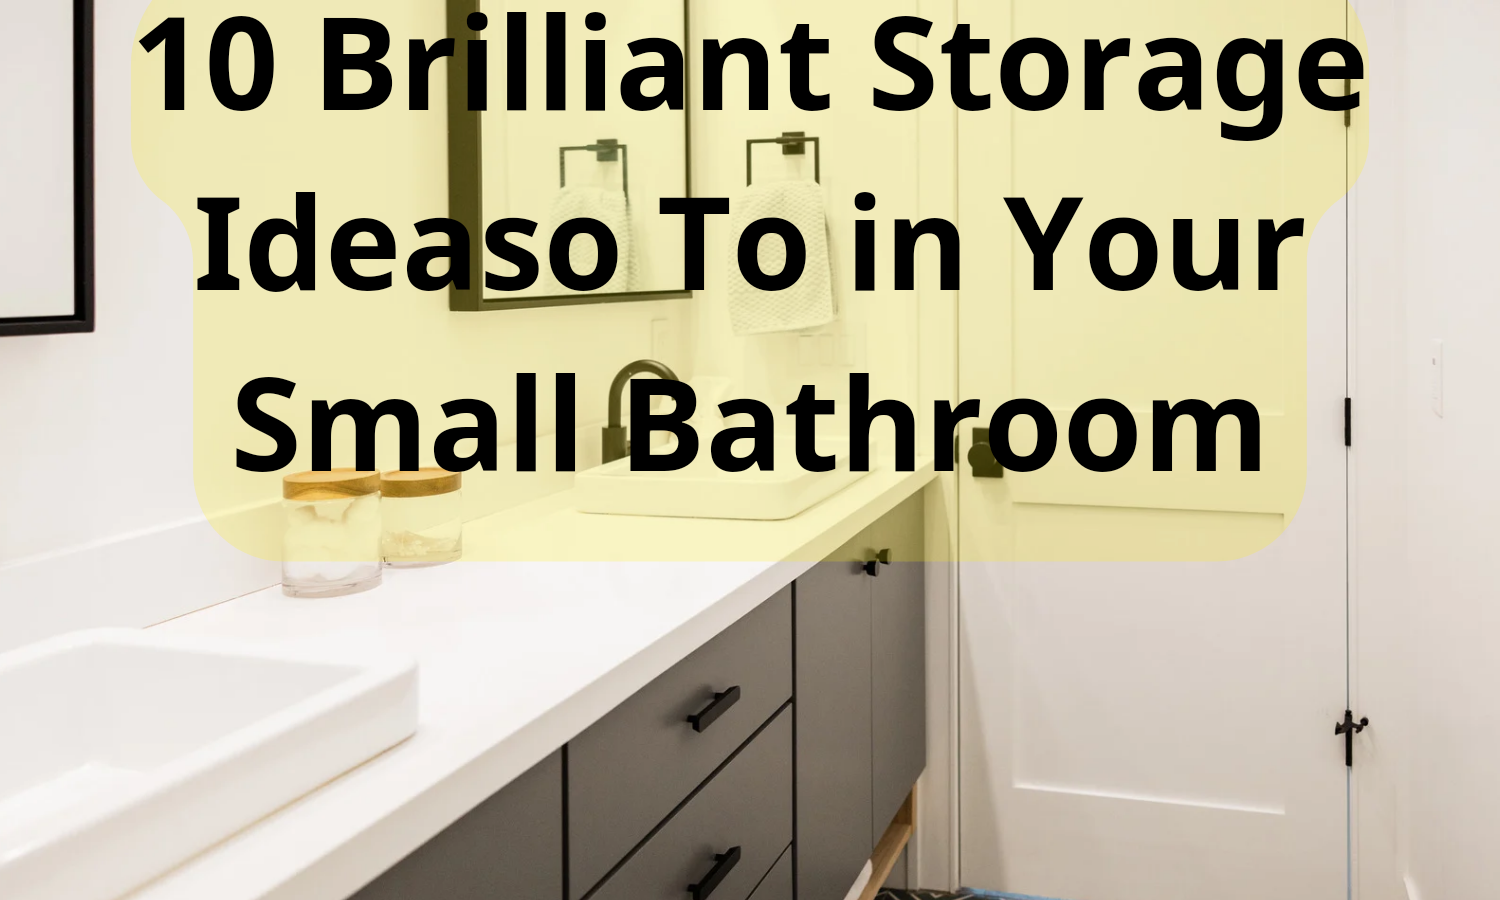 10 Brilliant Storage Ideas to Maximize Space in Your Small Bathroom